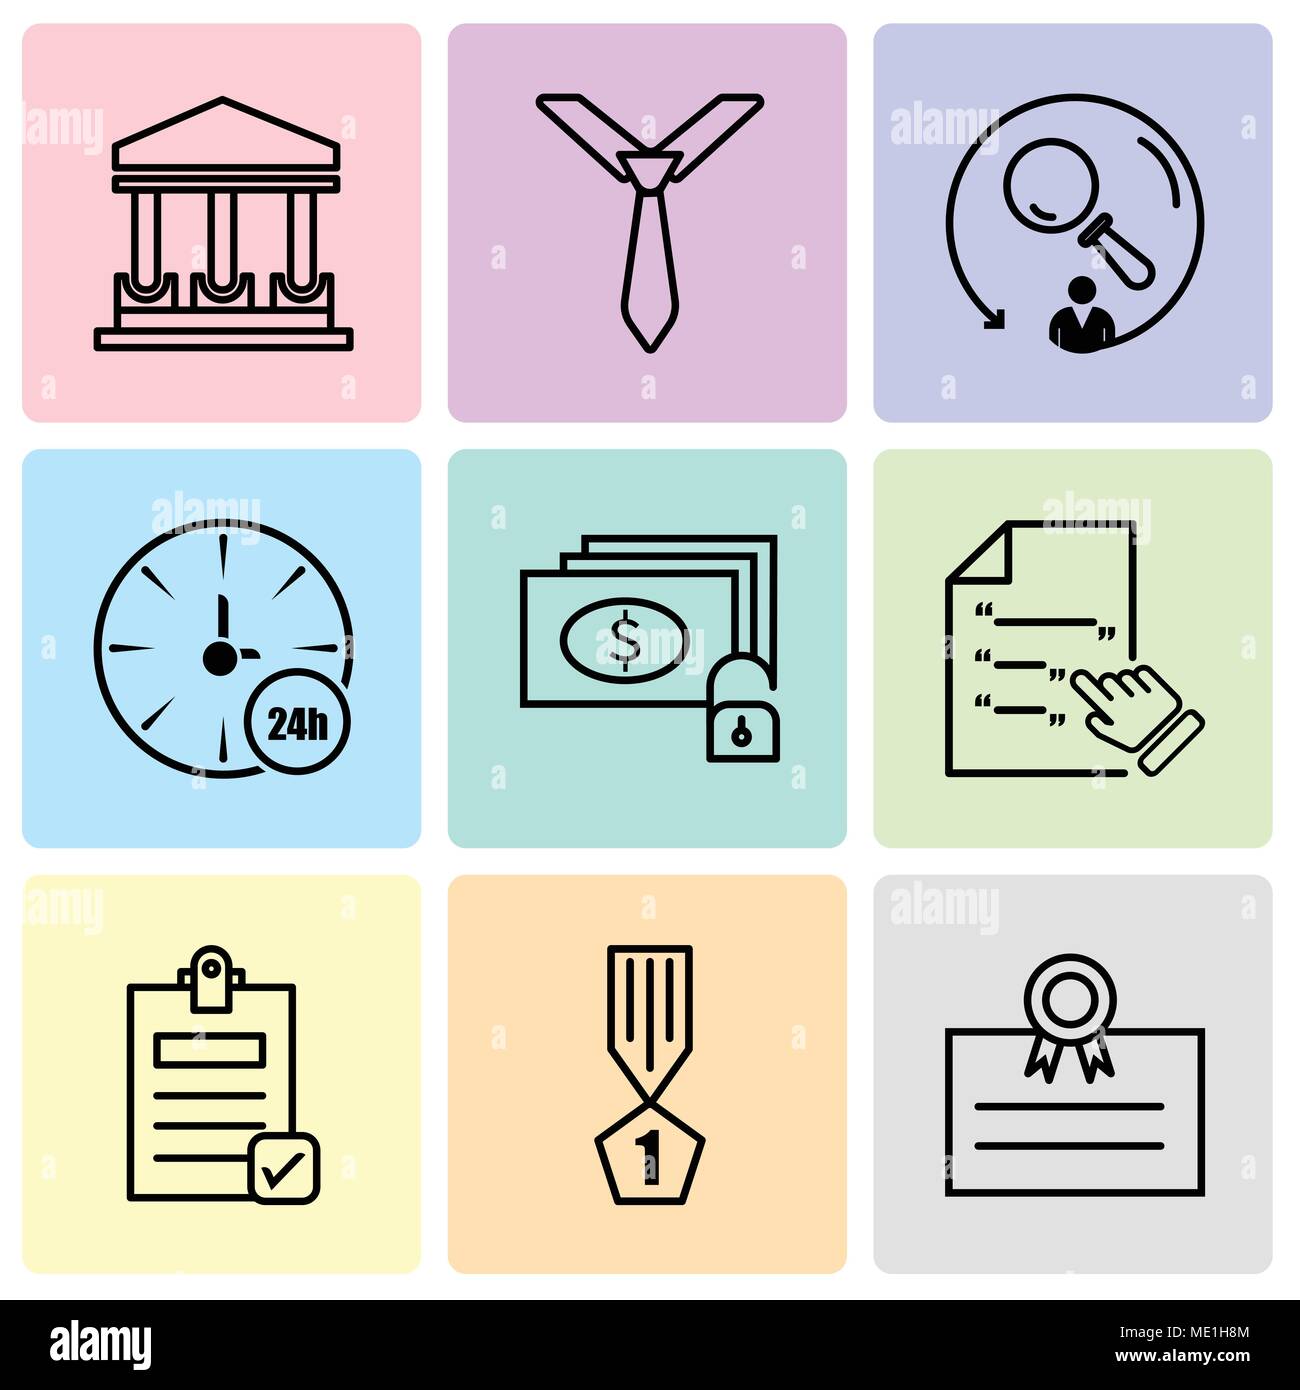 Set Of 9 simple editable icons such as postcard, winner, Check document, Contract, money and key, watch, searching, tie, government building, can be u Stock Vector